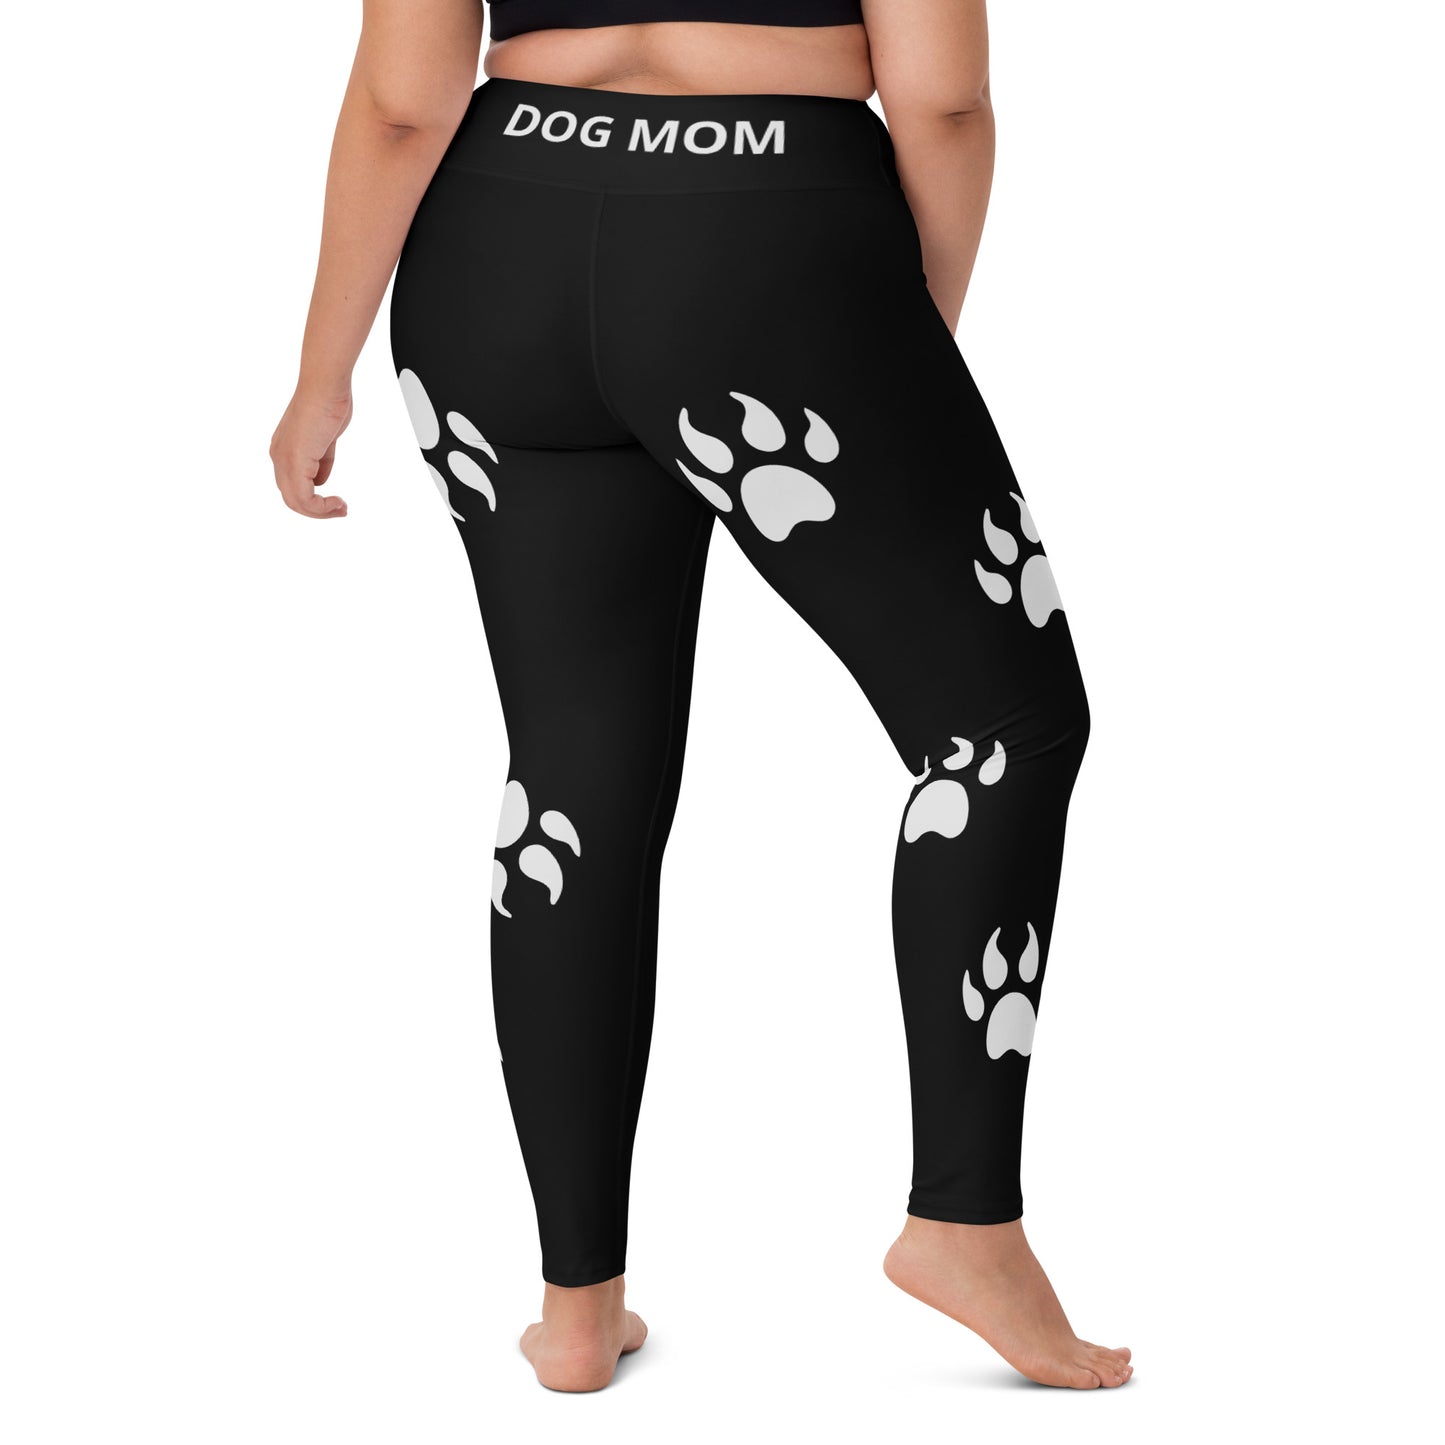 A woman wearing Sweetest Paw's Yoga Leggings Black PawPrint with dog paw prints.